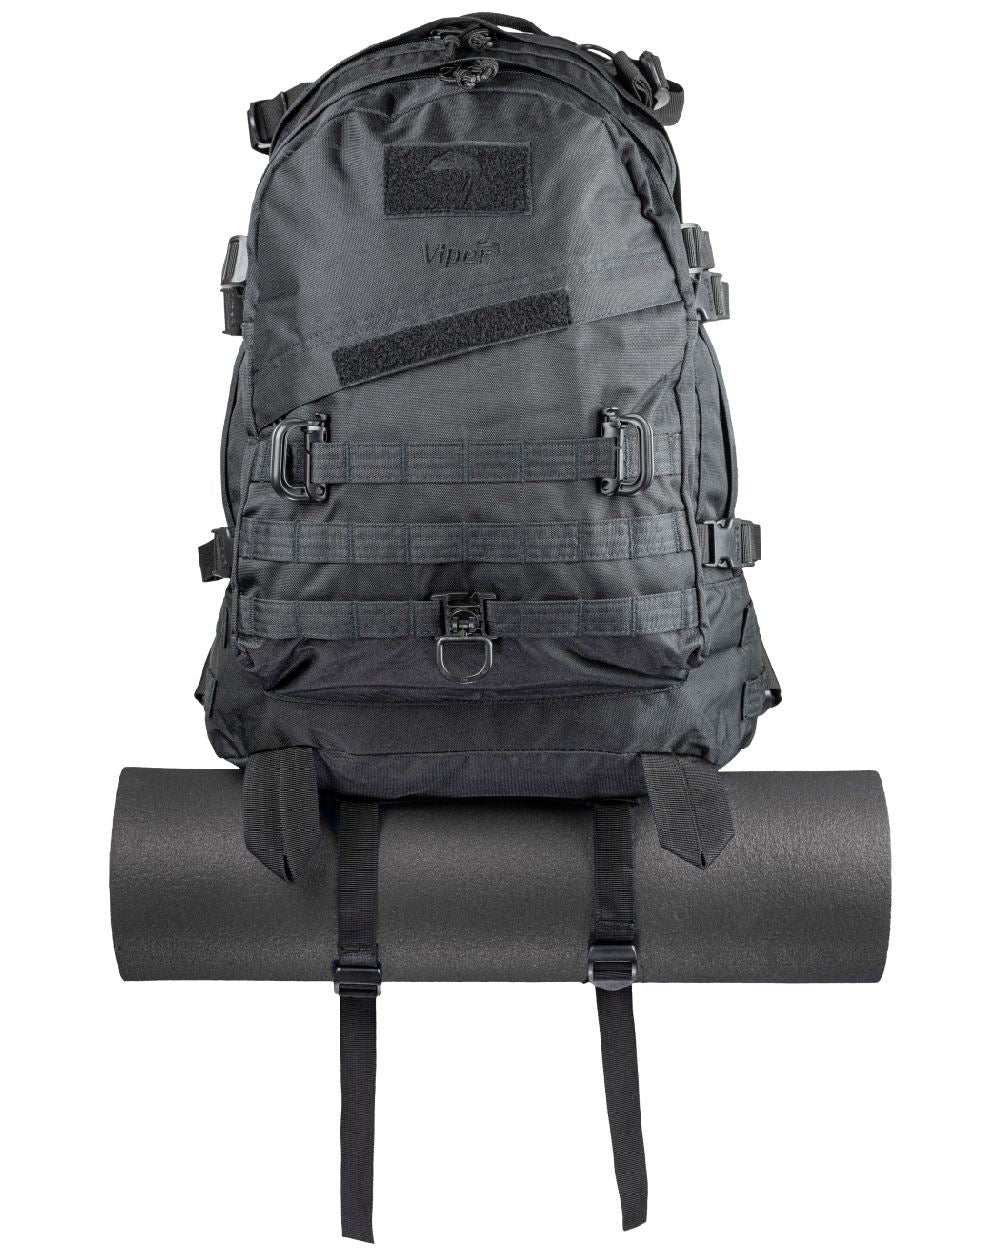 Viper Special Ops Pack in Black 